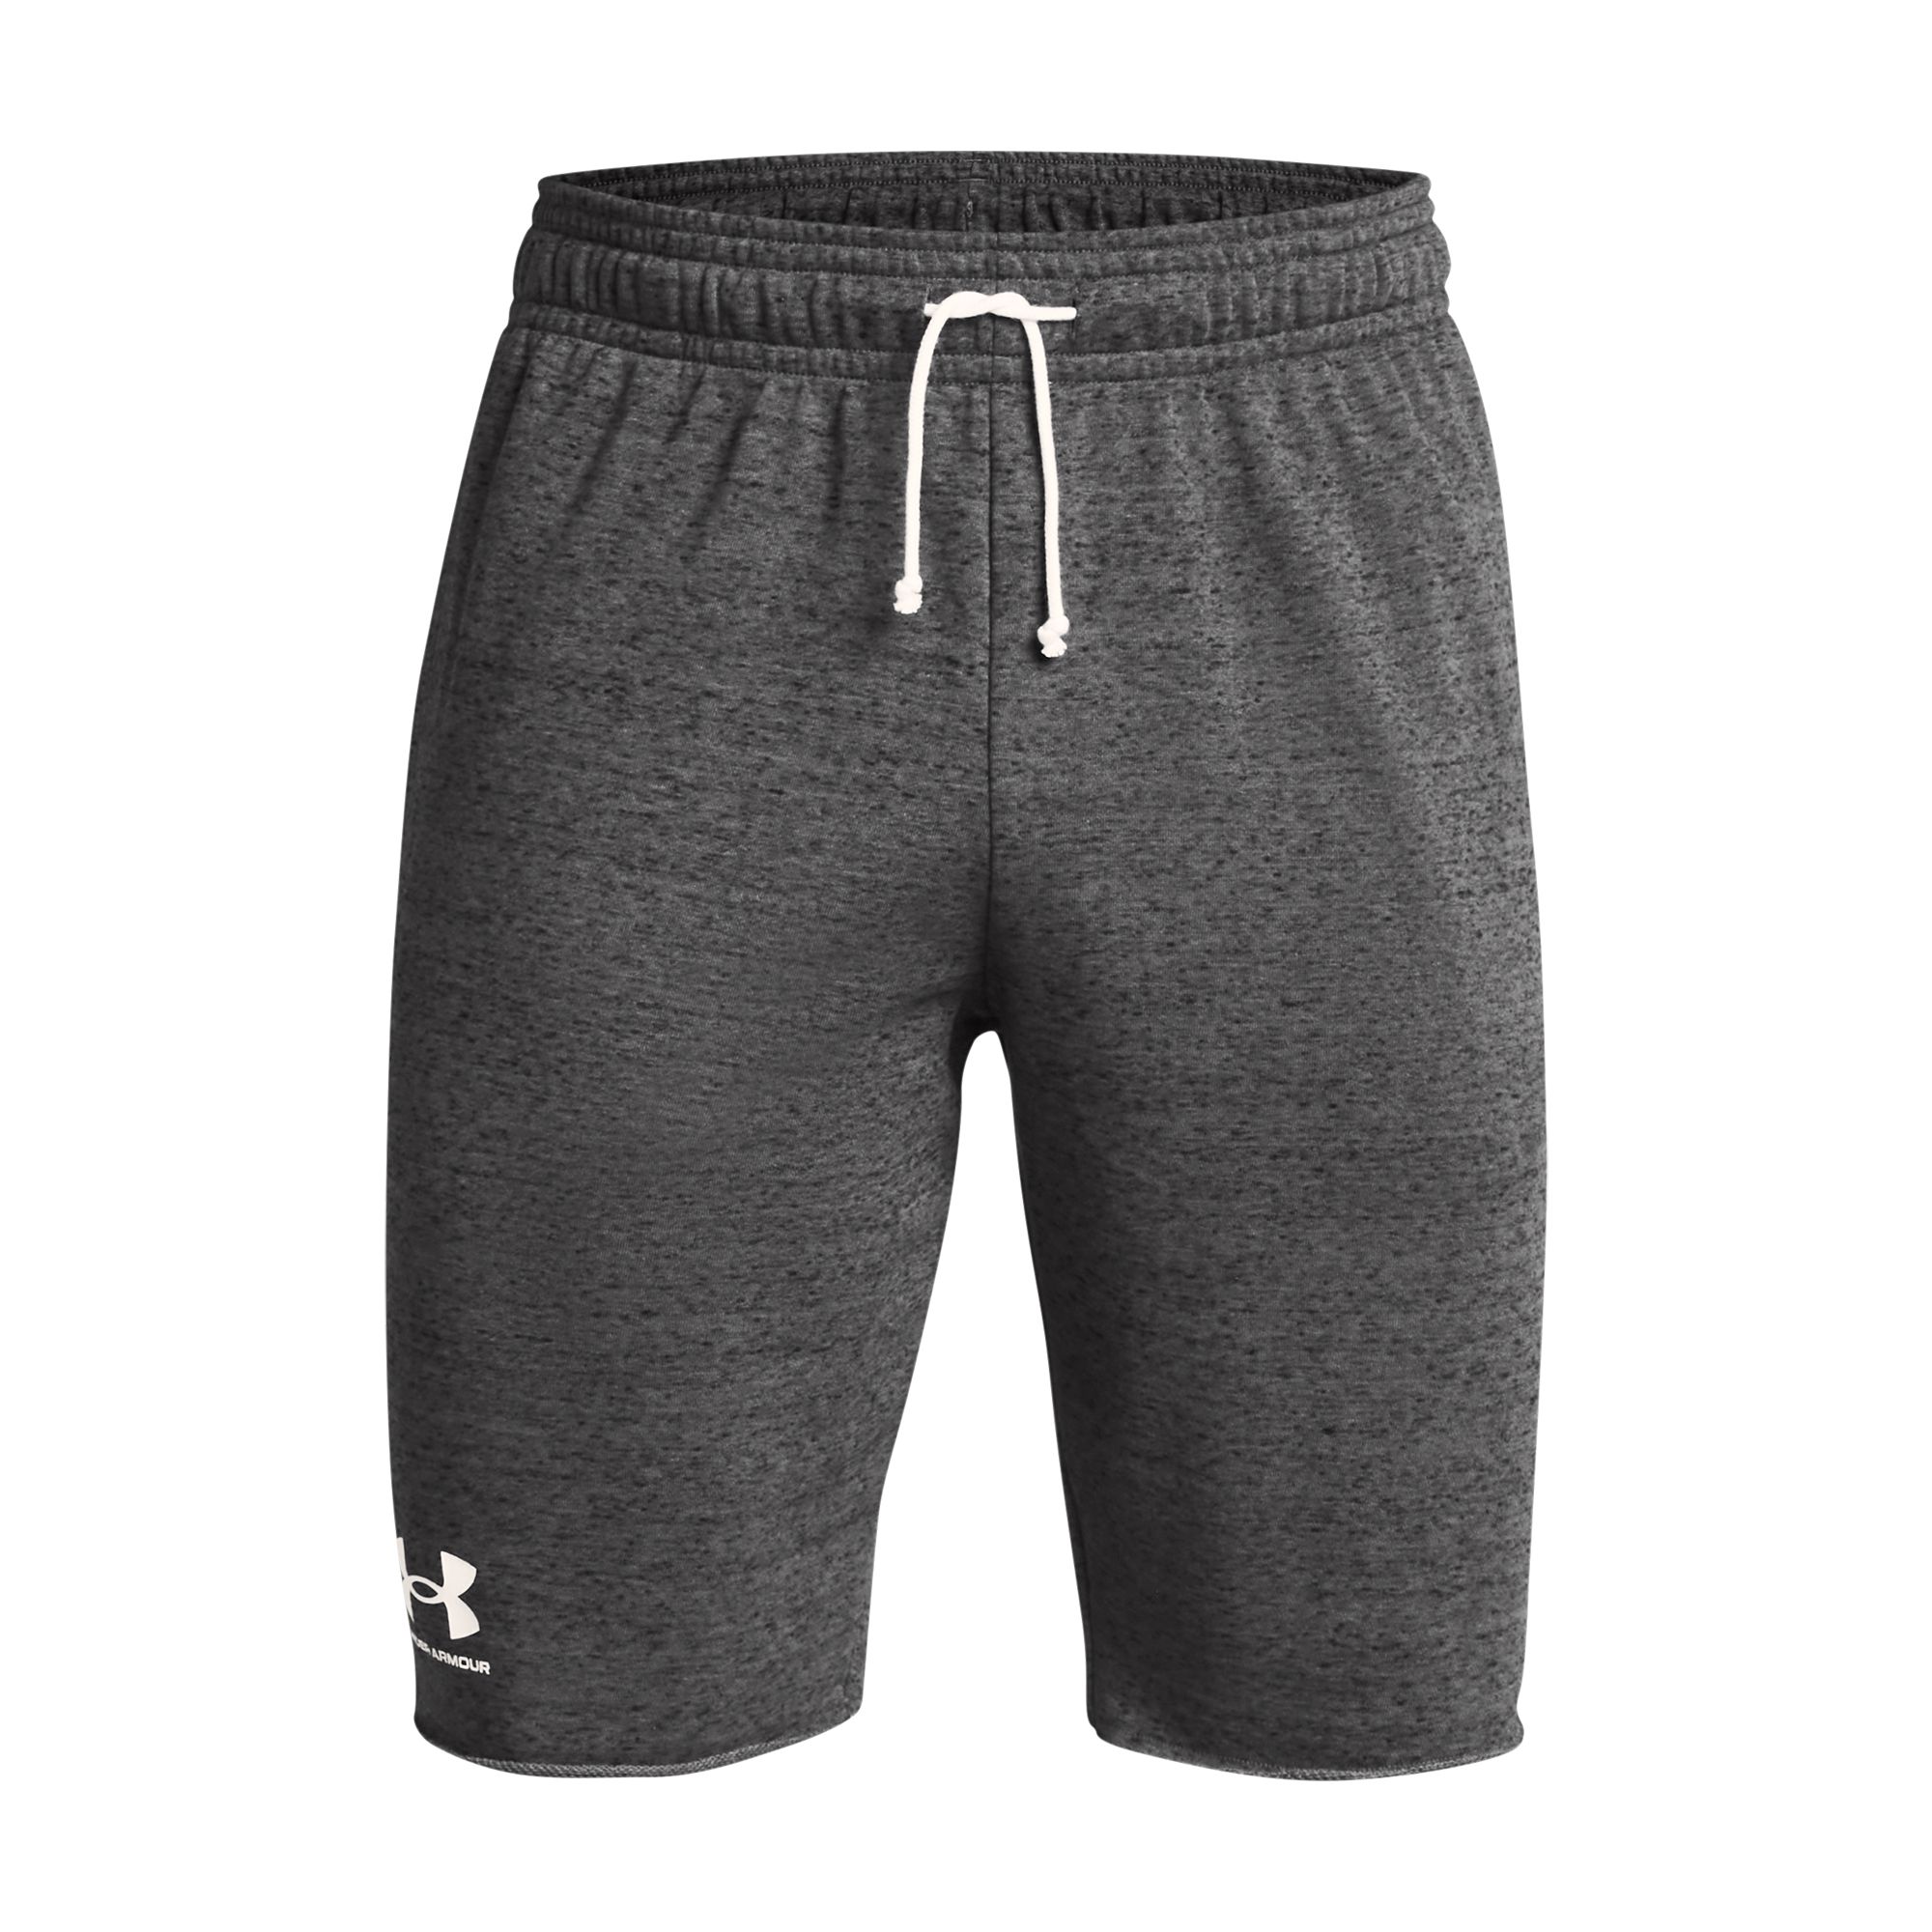 Rival Terry Short Under Armour - 2839546